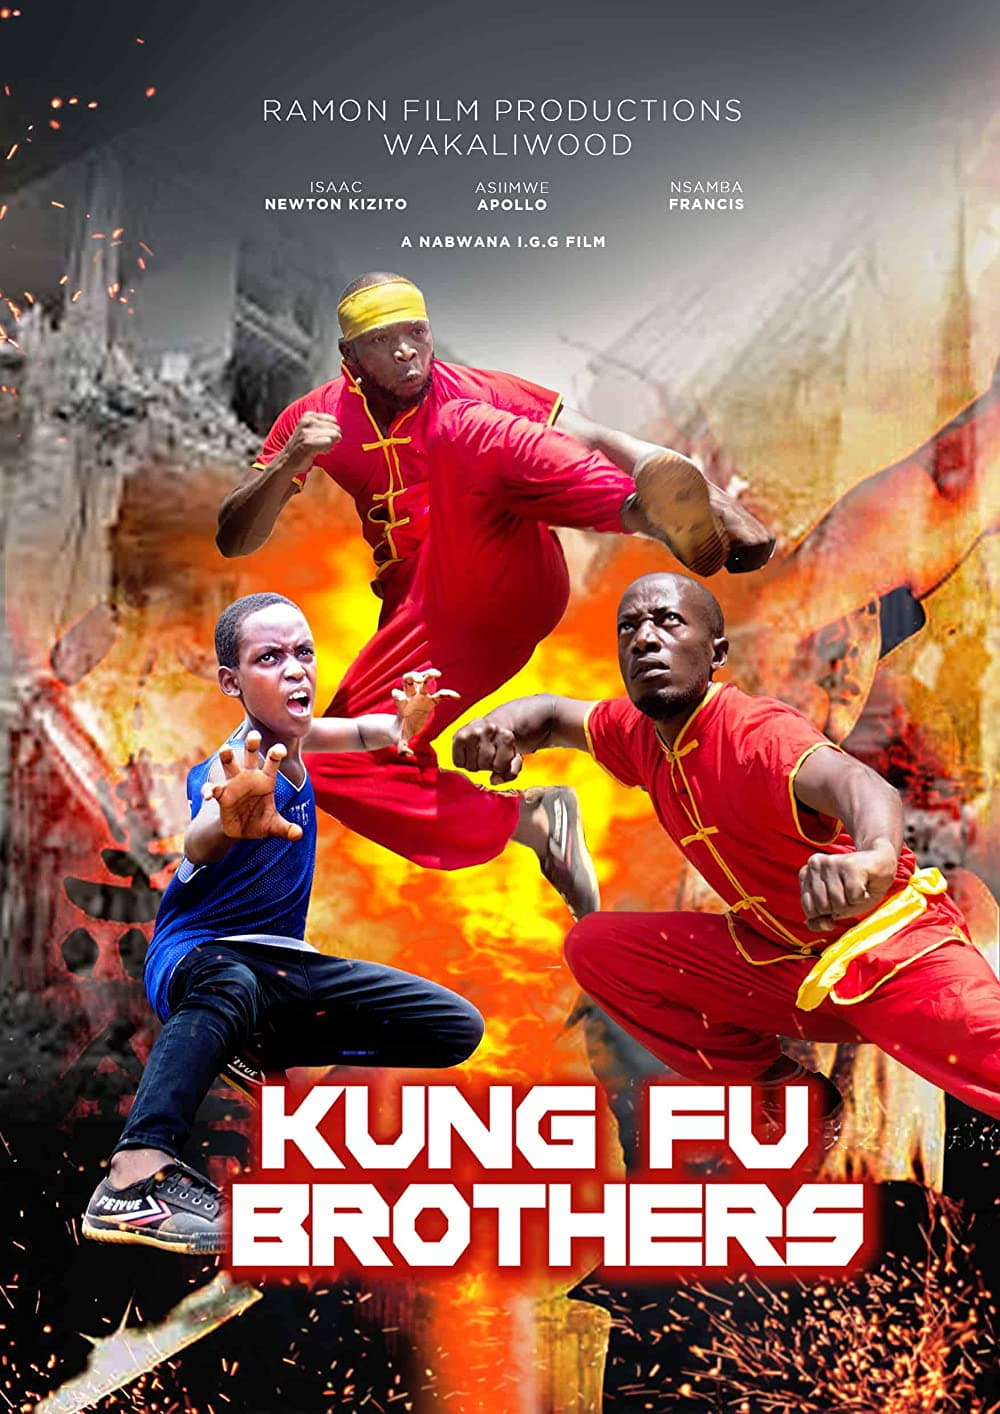 Kung Fu Brothers